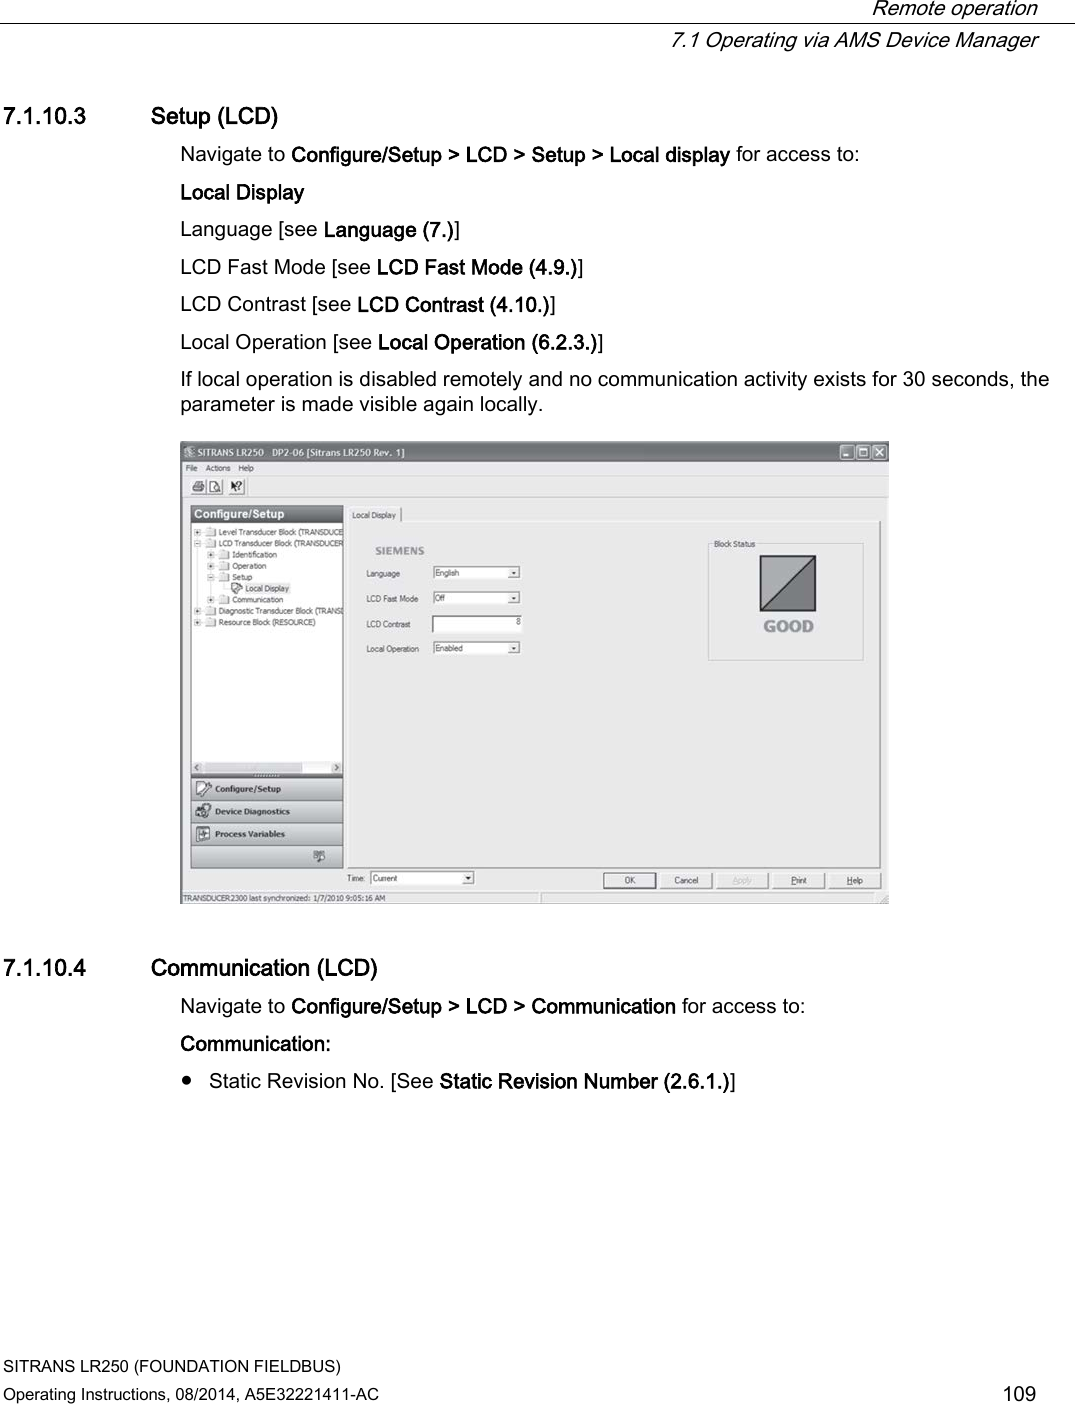  Remote operation  7.1 Operating via AMS Device Manager SITRANS LR250 (FOUNDATION FIELDBUS) Operating Instructions, 08/2014, A5E32221411-AC 109 7.1.10.3 Setup (LCD) Navigate to Configure/Setup &gt; LCD &gt; Setup &gt; Local display for access to: Local Display Language [see Language (7.)]  LCD Fast Mode [see LCD Fast Mode (4.9.)] LCD Contrast [see LCD Contrast (4.10.)] Local Operation [see Local Operation (6.2.3.)] If local operation is disabled remotely and no communication activity exists for 30 seconds, the parameter is made visible again locally.  7.1.10.4 Communication (LCD) Navigate to Configure/Setup &gt; LCD &gt; Communication for access to: Communication: ● Static Revision No. [See Static Revision Number (2.6.1.)] 